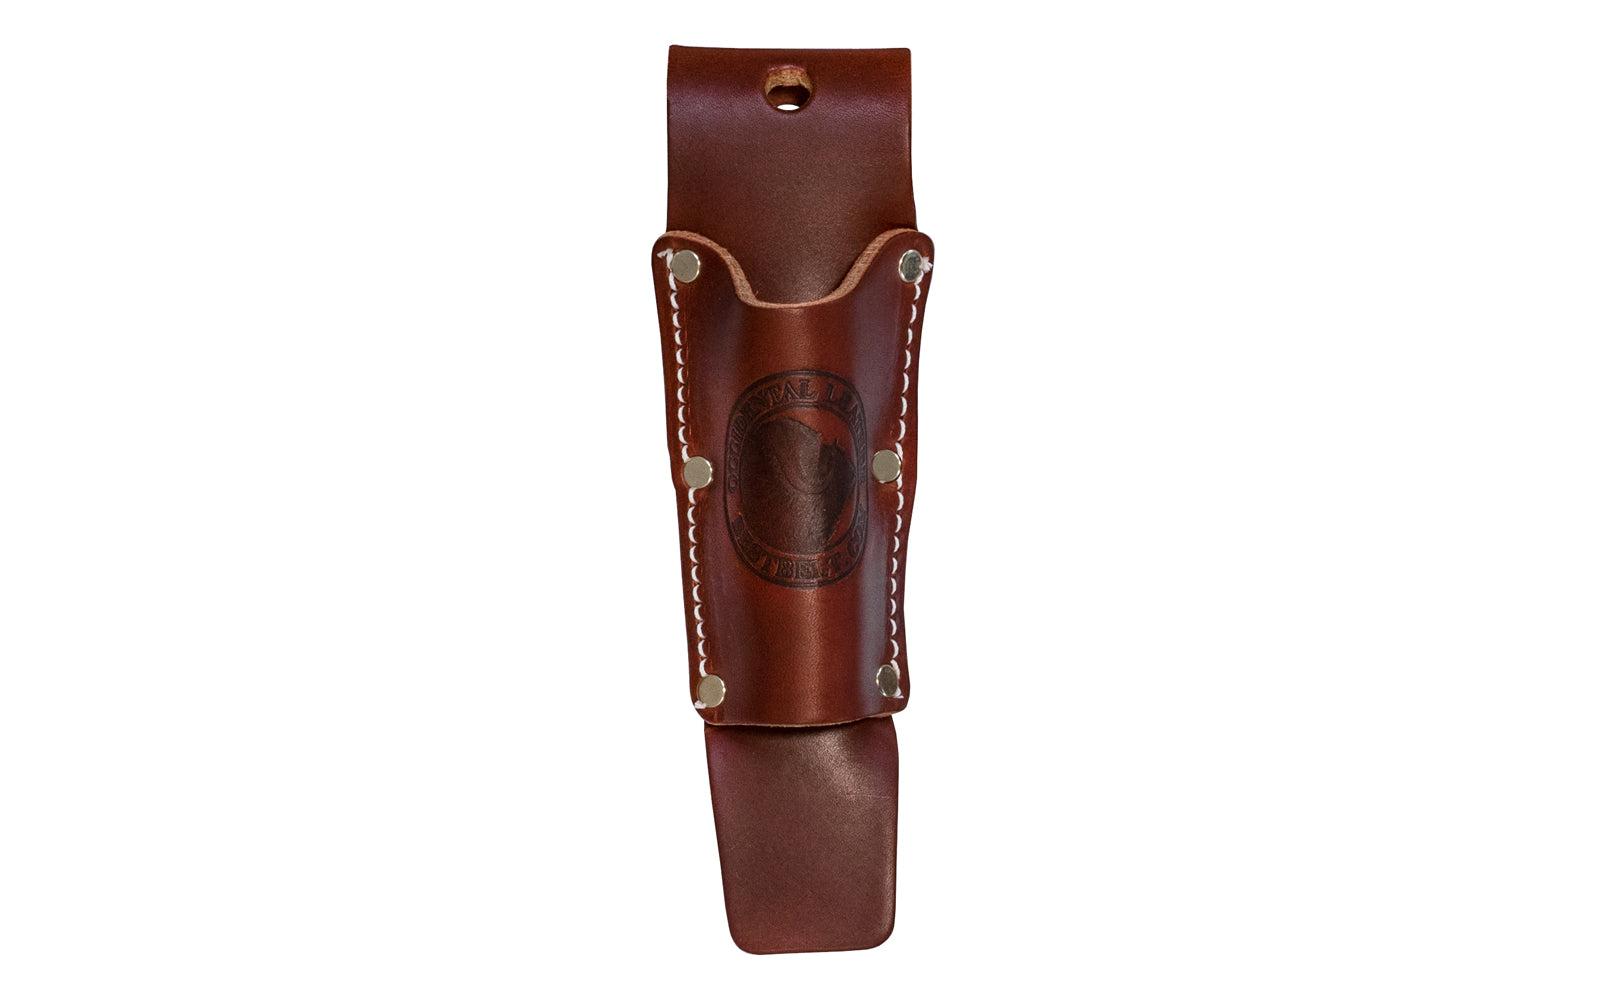 Occidental Leather Tapered Tool Holder Holster ~ 5032 - Model 5032 - Fits up to a 3" work belt - Leather Tool Holster - 3" projection - Riveted - Holster - Hand Made - 759244176803 - Leather - Occidental Holder - Occidental Leather Tool Holder - Tool Holder - Tapered Tool Holster - Tapered Holster - Tapered Tool Holder